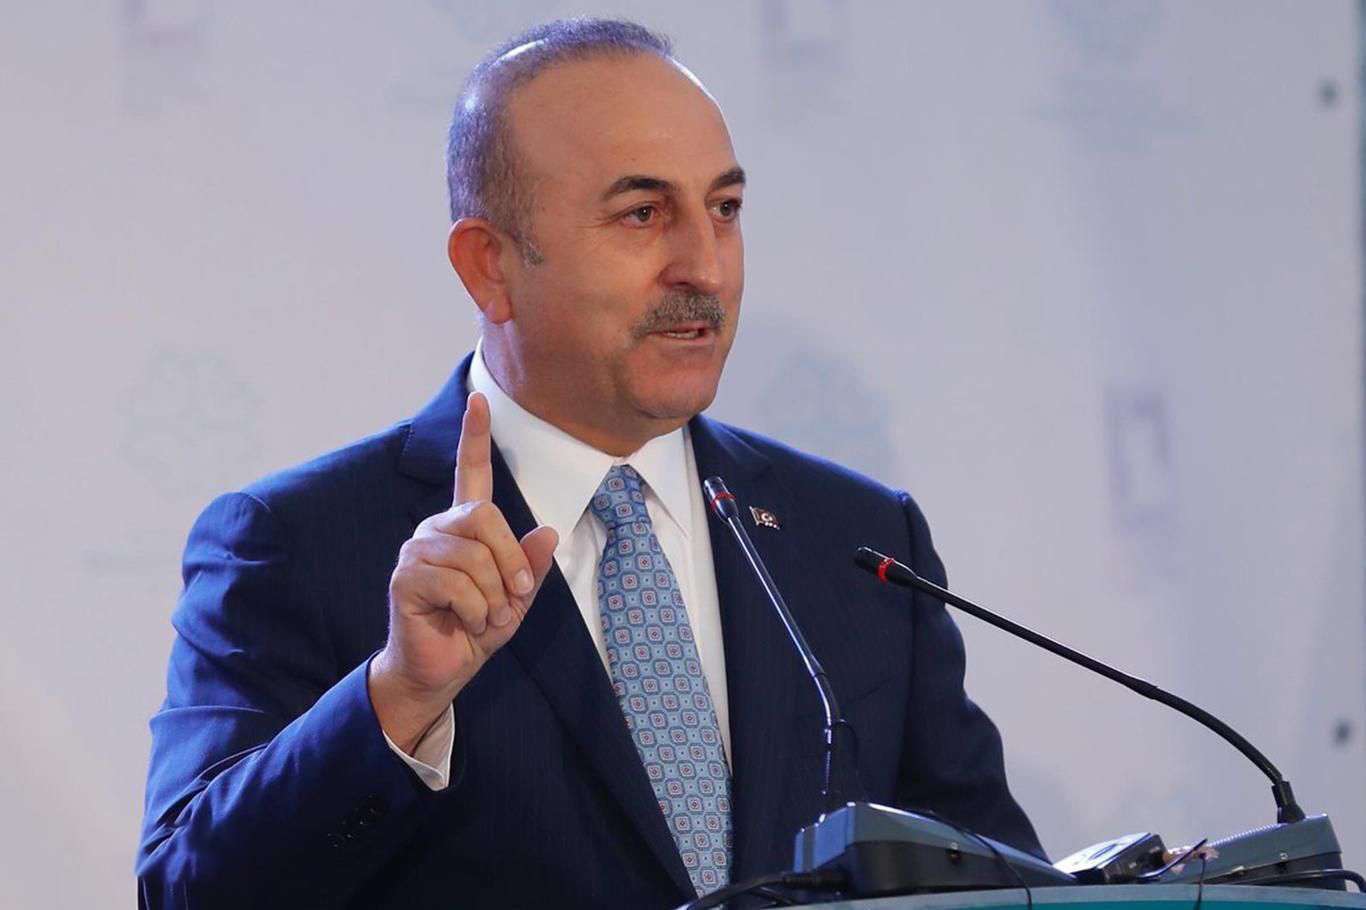 Çavuşoğlu: We have started diplomatic-level contacts with Egypt